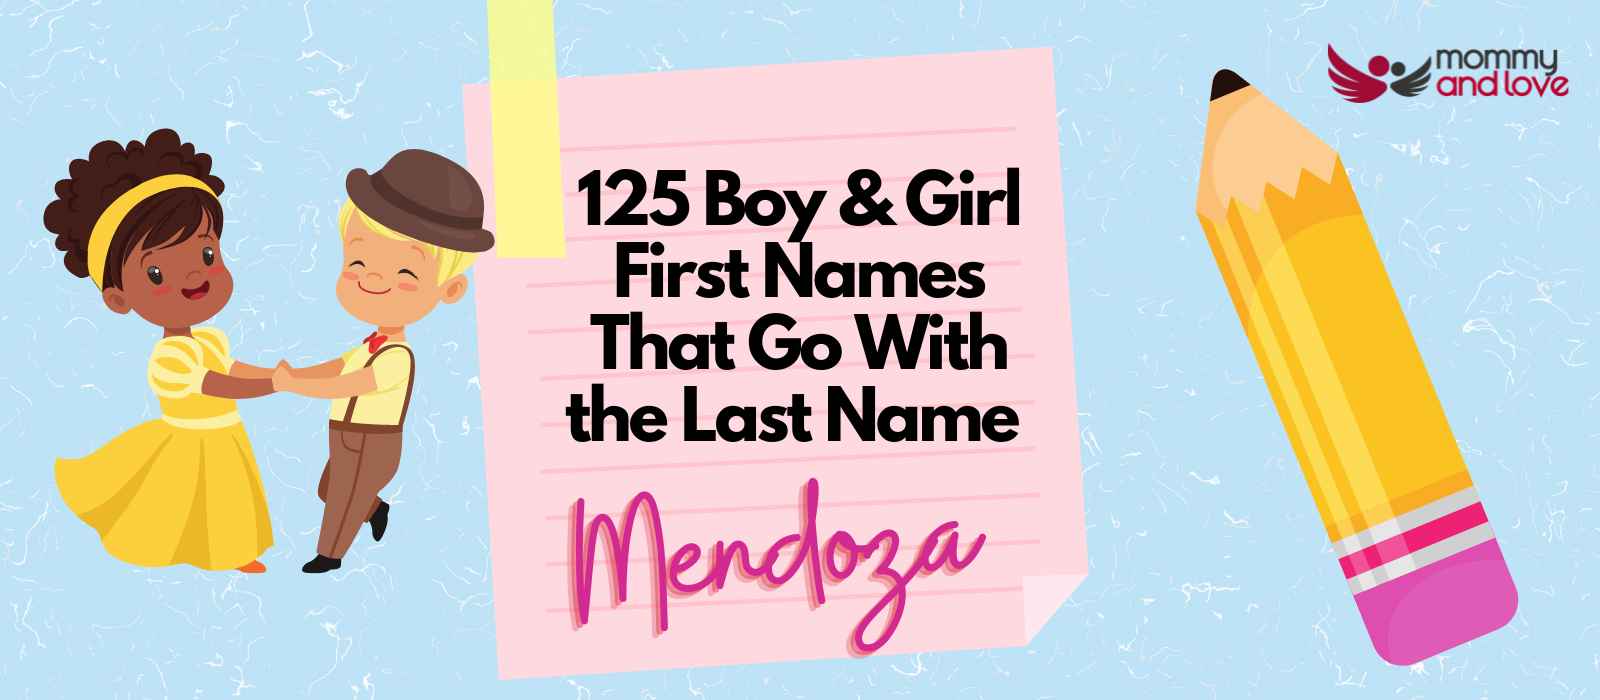 125 Boy & Girl First Names That Go With the Last Name Mendoza